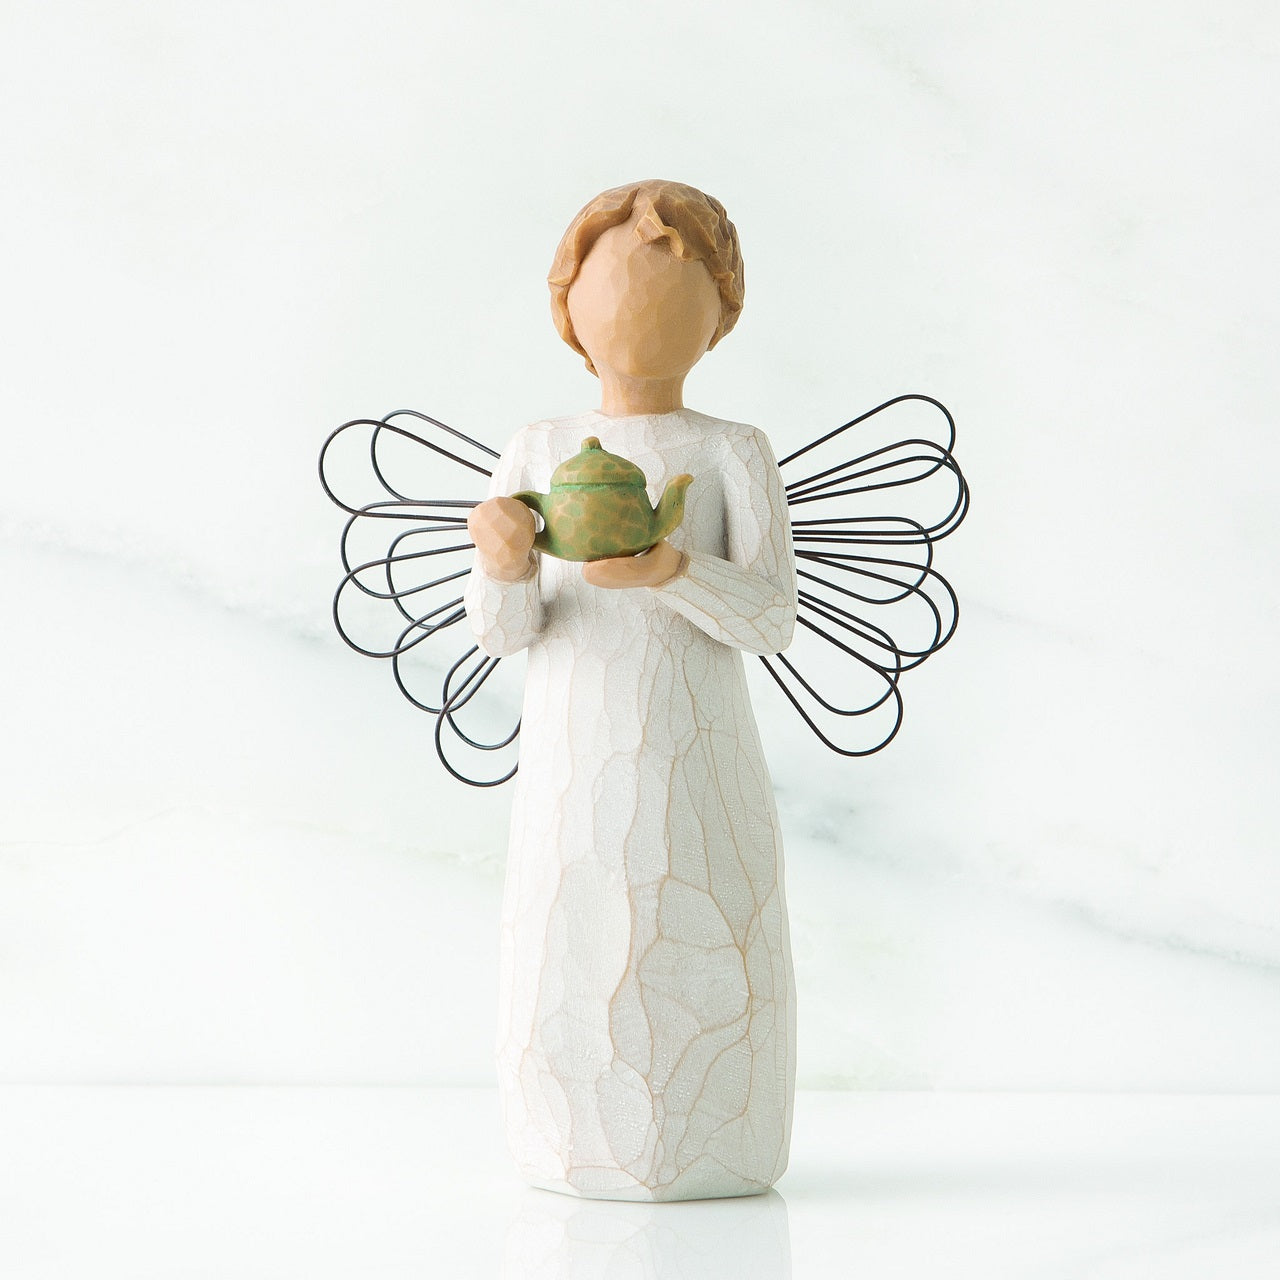 Willow Tree Angel of the Kitchen  Willow Tree is an intimate line of figurative sculptures representing sentiments of love, closeness, healing, courage, hope...all the emotions we encounter in life. Artist Susan Lordi hand carves the original of each Willow Tree sculpture.